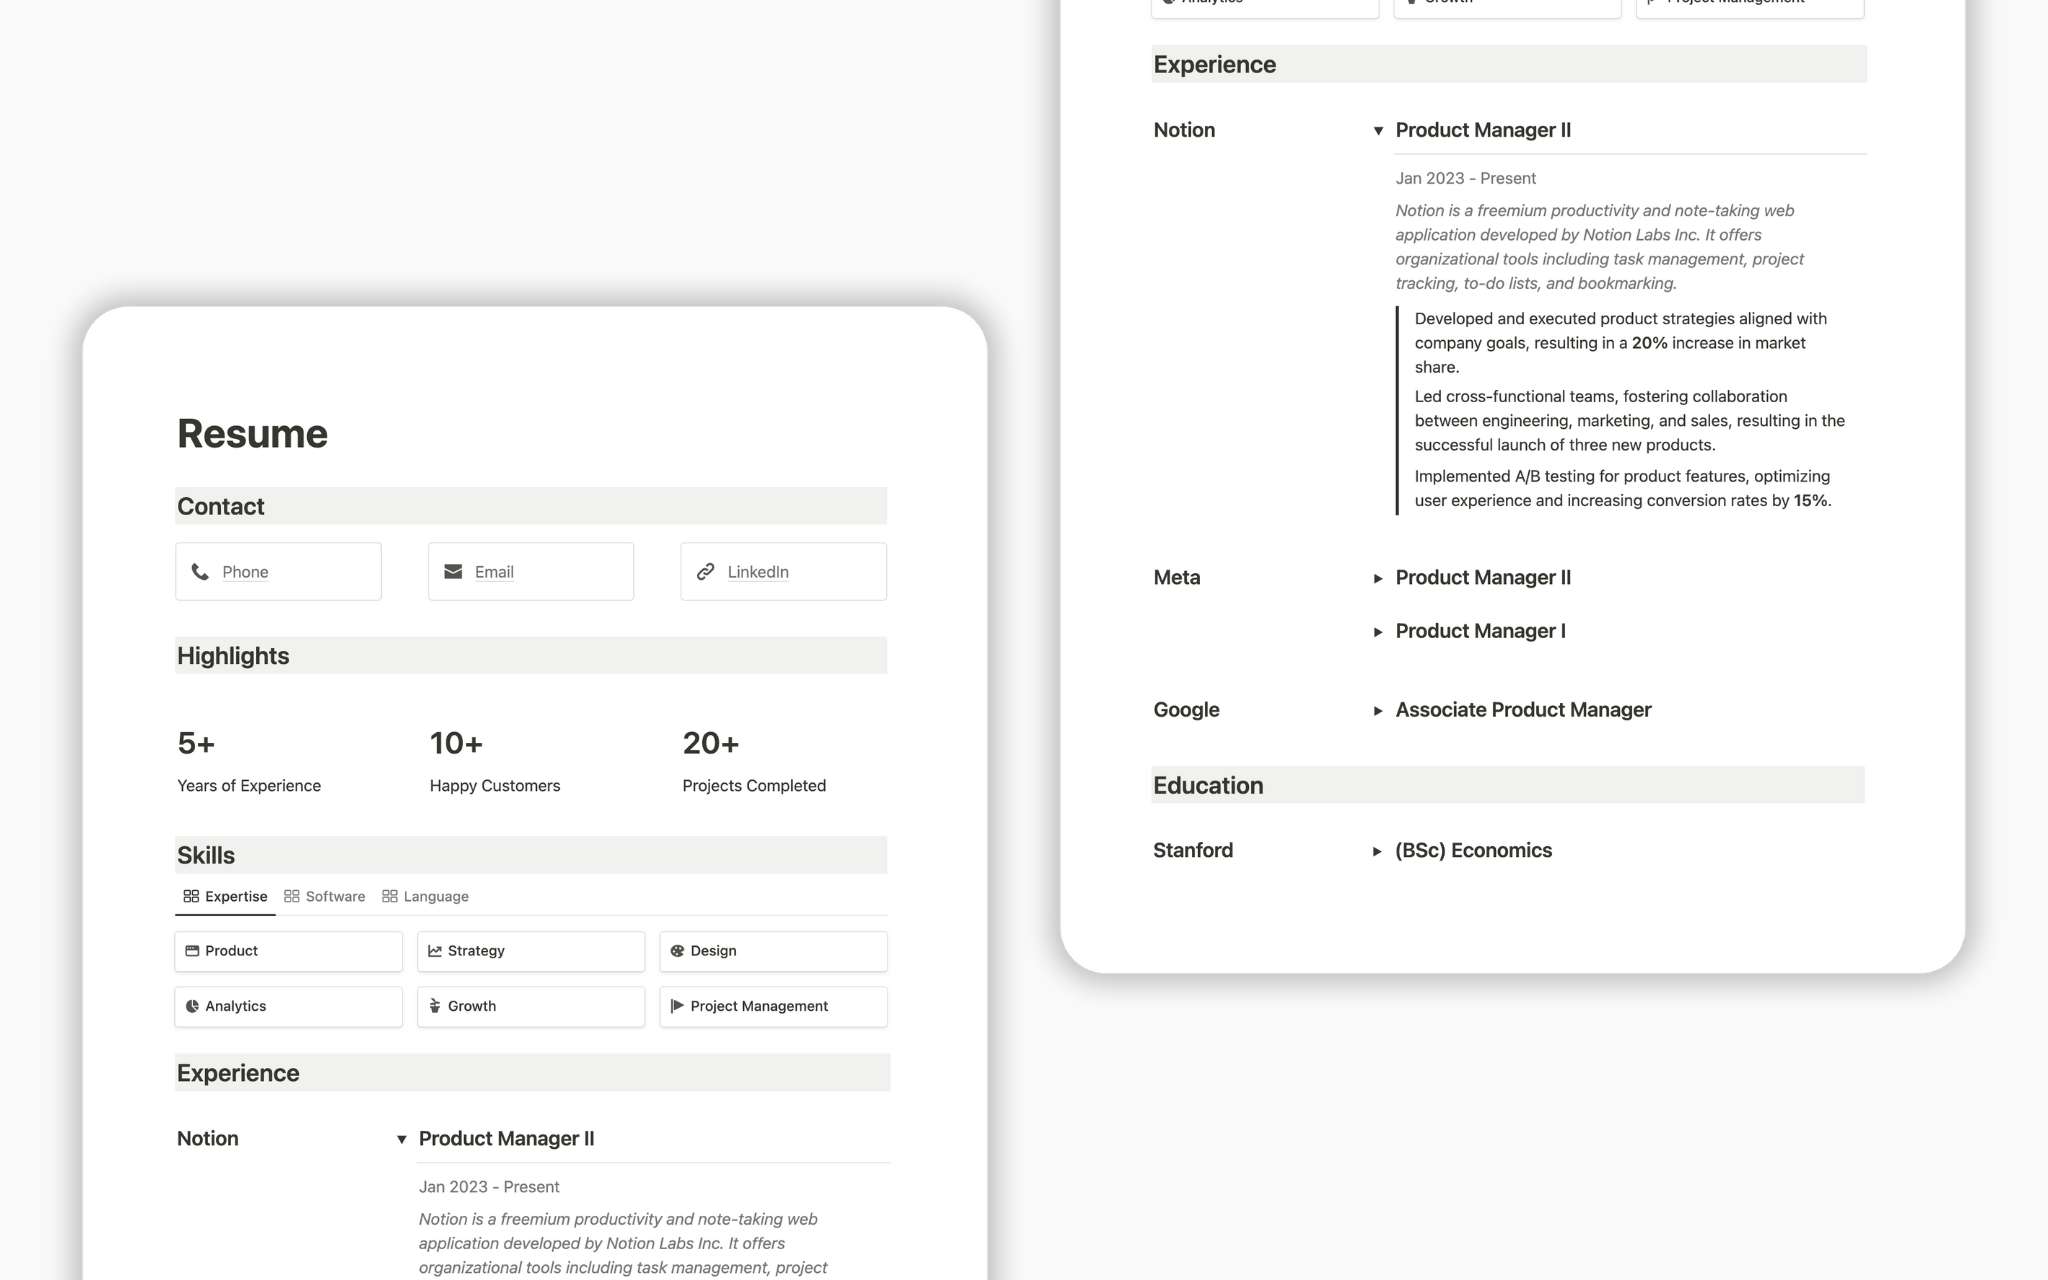 Are you a job seeker looking for the perfect resume? With this template, you can build and publish a minimal & functional resume on Notion within minutes.